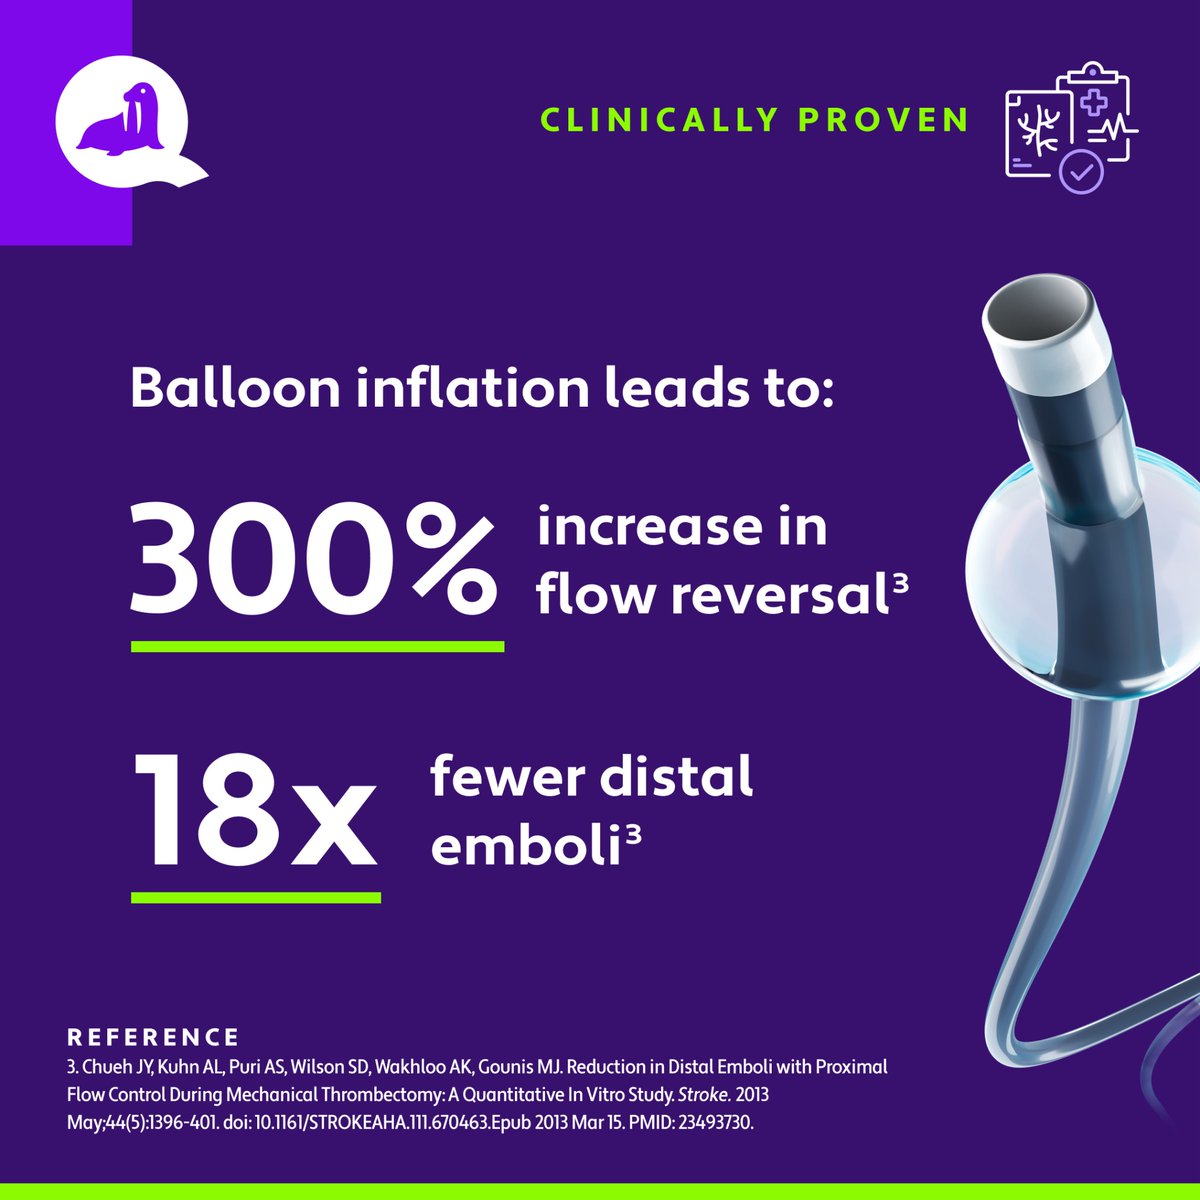 Balloon Guide Catheter utilization in acute ischemic stroke thrombectomy makes a difference - clinically proven. #WALRUS #QapelMedical #BGC